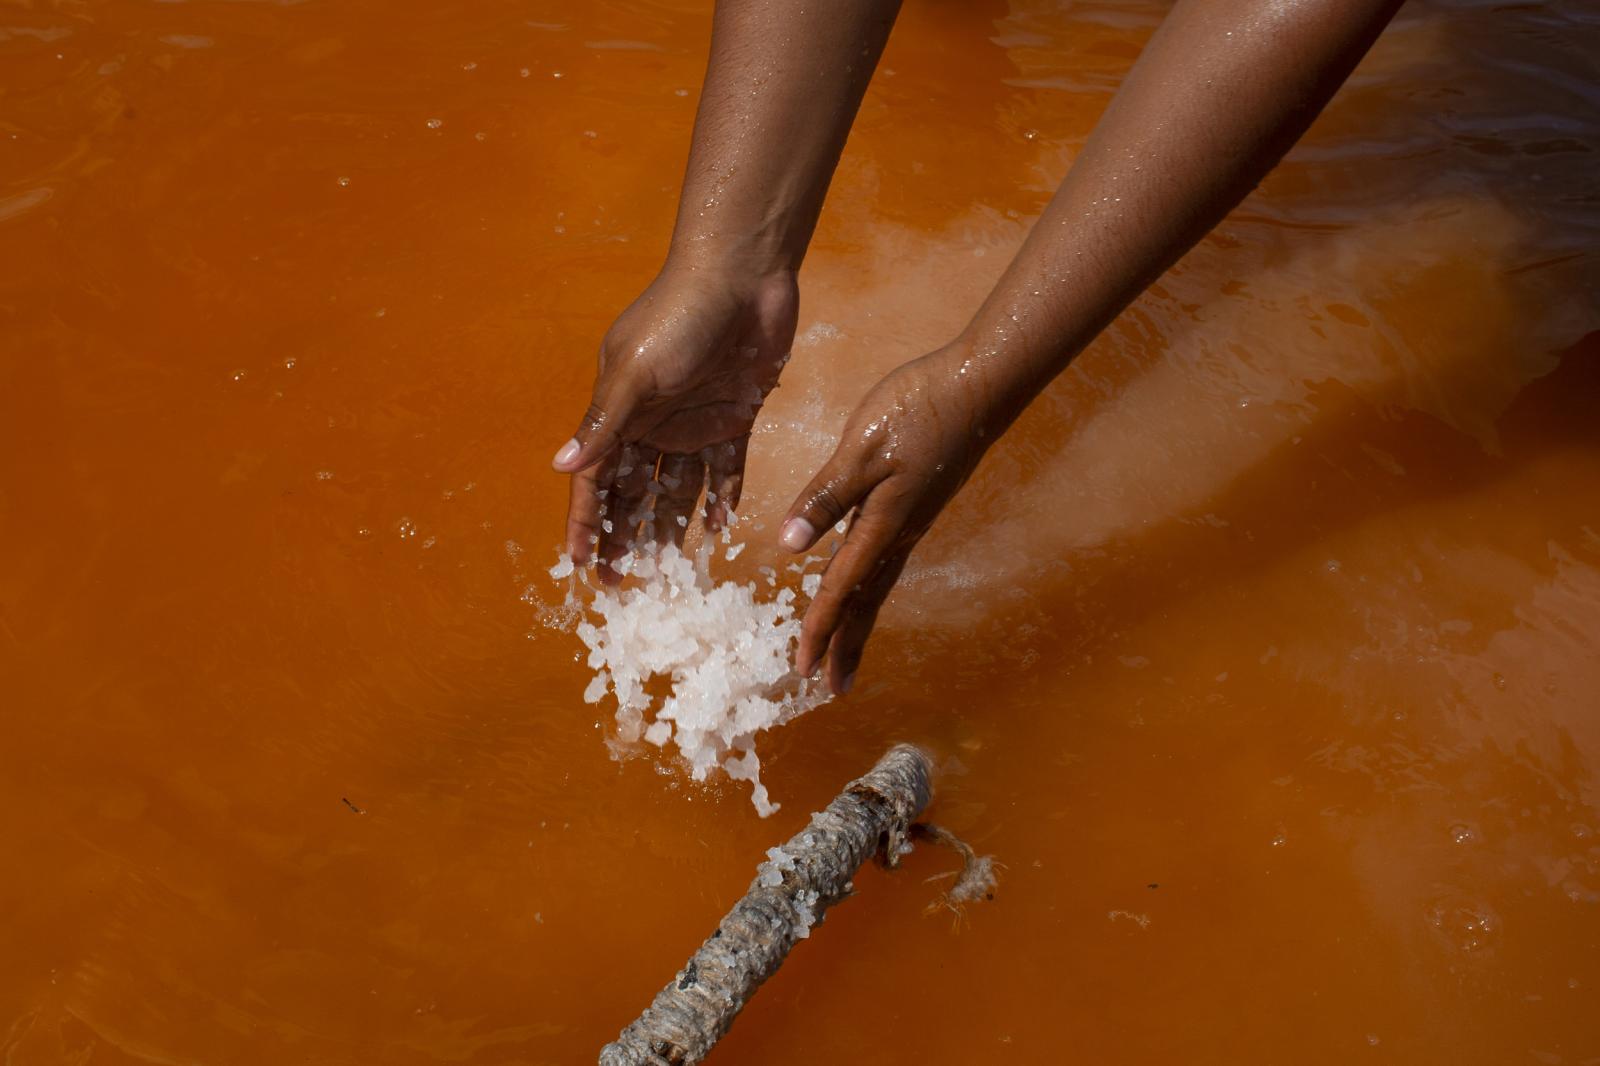 A worker harvest salt in&nbsp; Xtamp&uacute;, Yucatan state, Mexico, on Saturday, Oct. 26, 2019. Photographer: Koral Carballo/Bloomberg